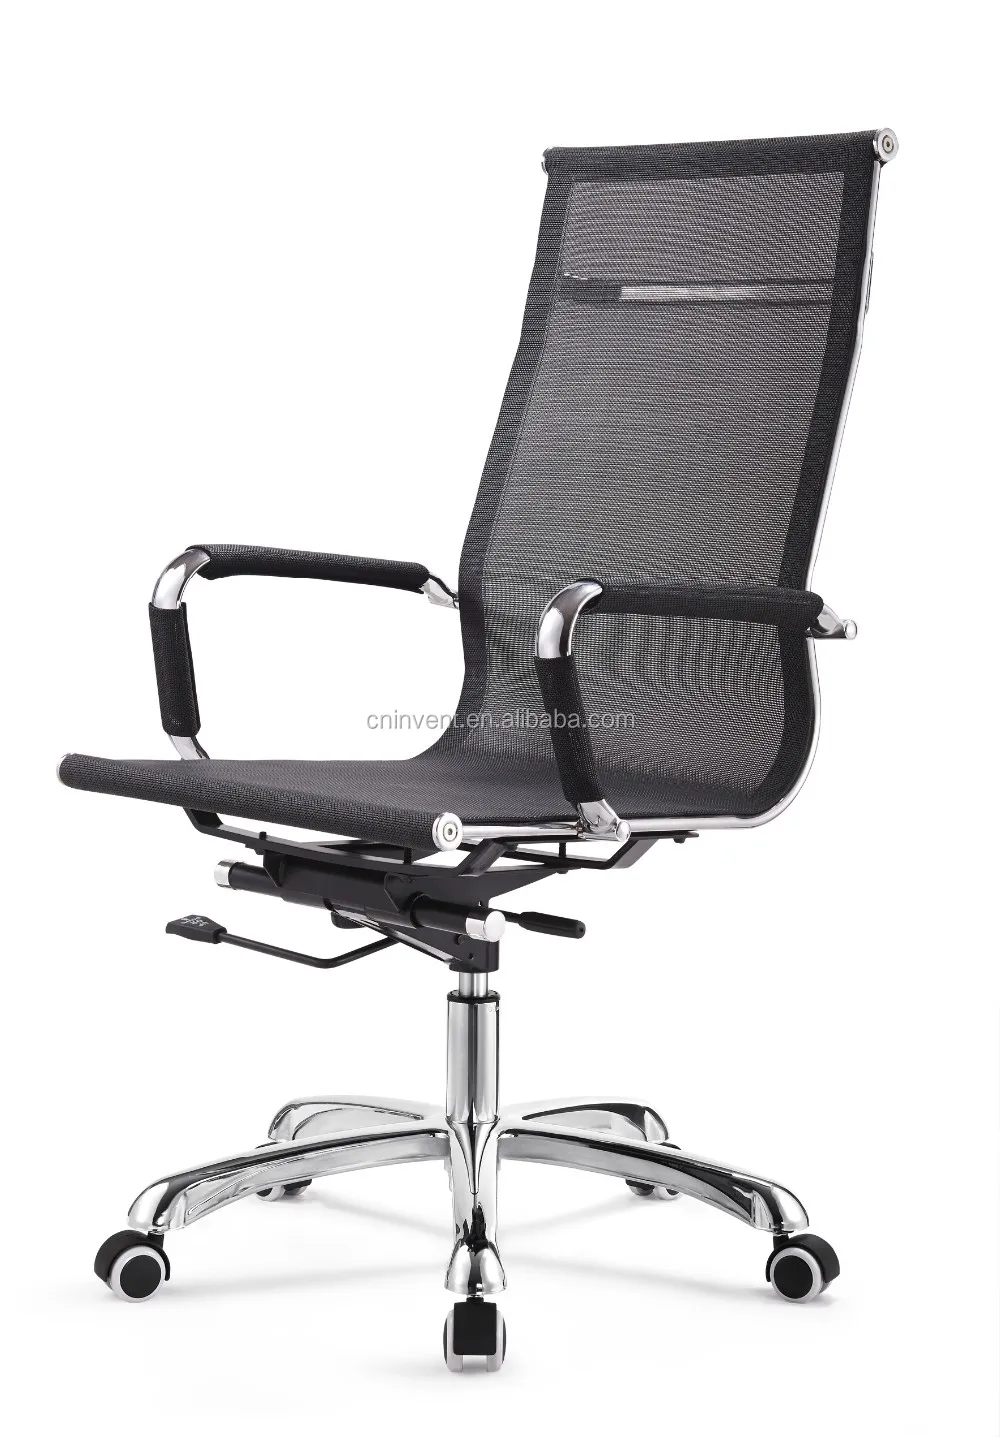 Low Price Aluminum Alloy Office Mesh Chair - Buy Full Mesh Office Chair,Wire  Mesh Office Chair,Executive Office Chairs Product on 